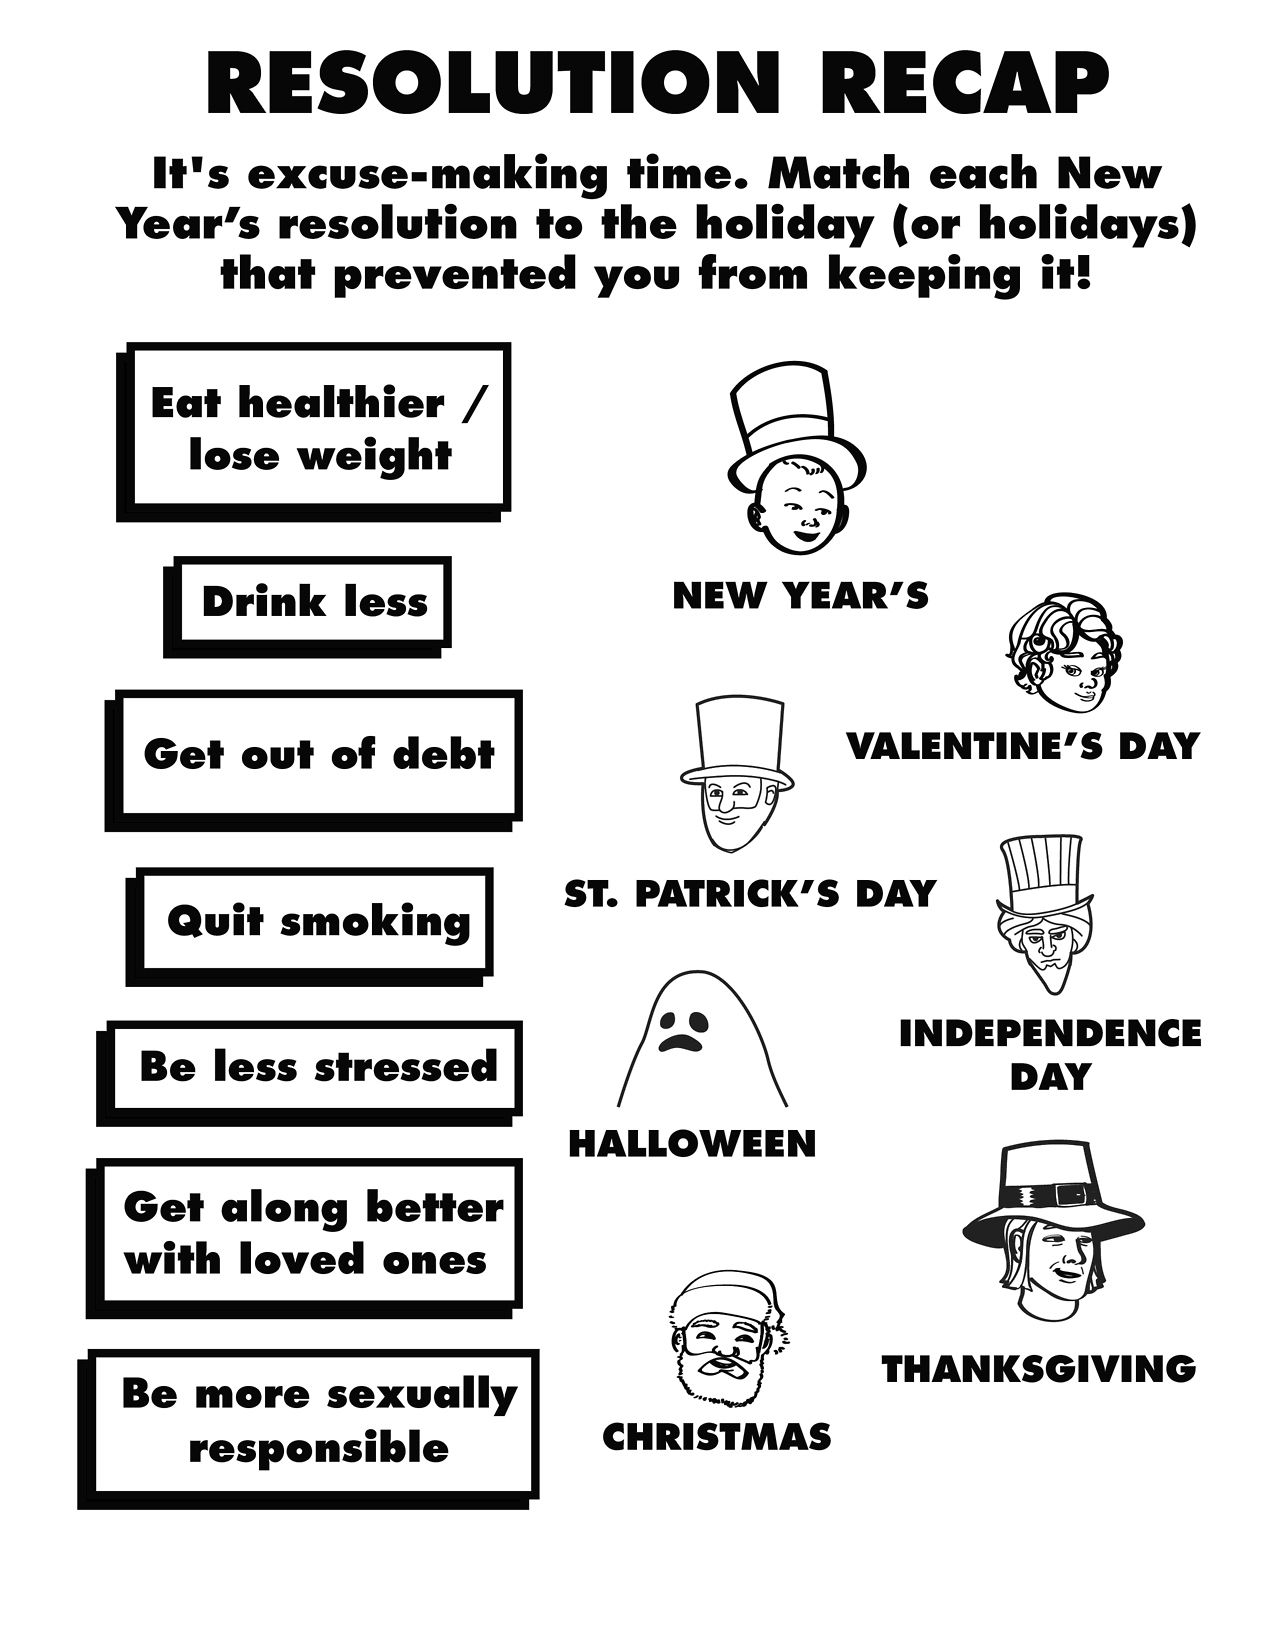 diagram - Resolution Recap It's excusemaking time. Match each New Year's resolution to the holiday or holidays that prevented you from keeping it! Eat healthier lose weight Drink less New Year'S Get out of debt Valentine'S Day St. Patrick'S Day Quit smoki